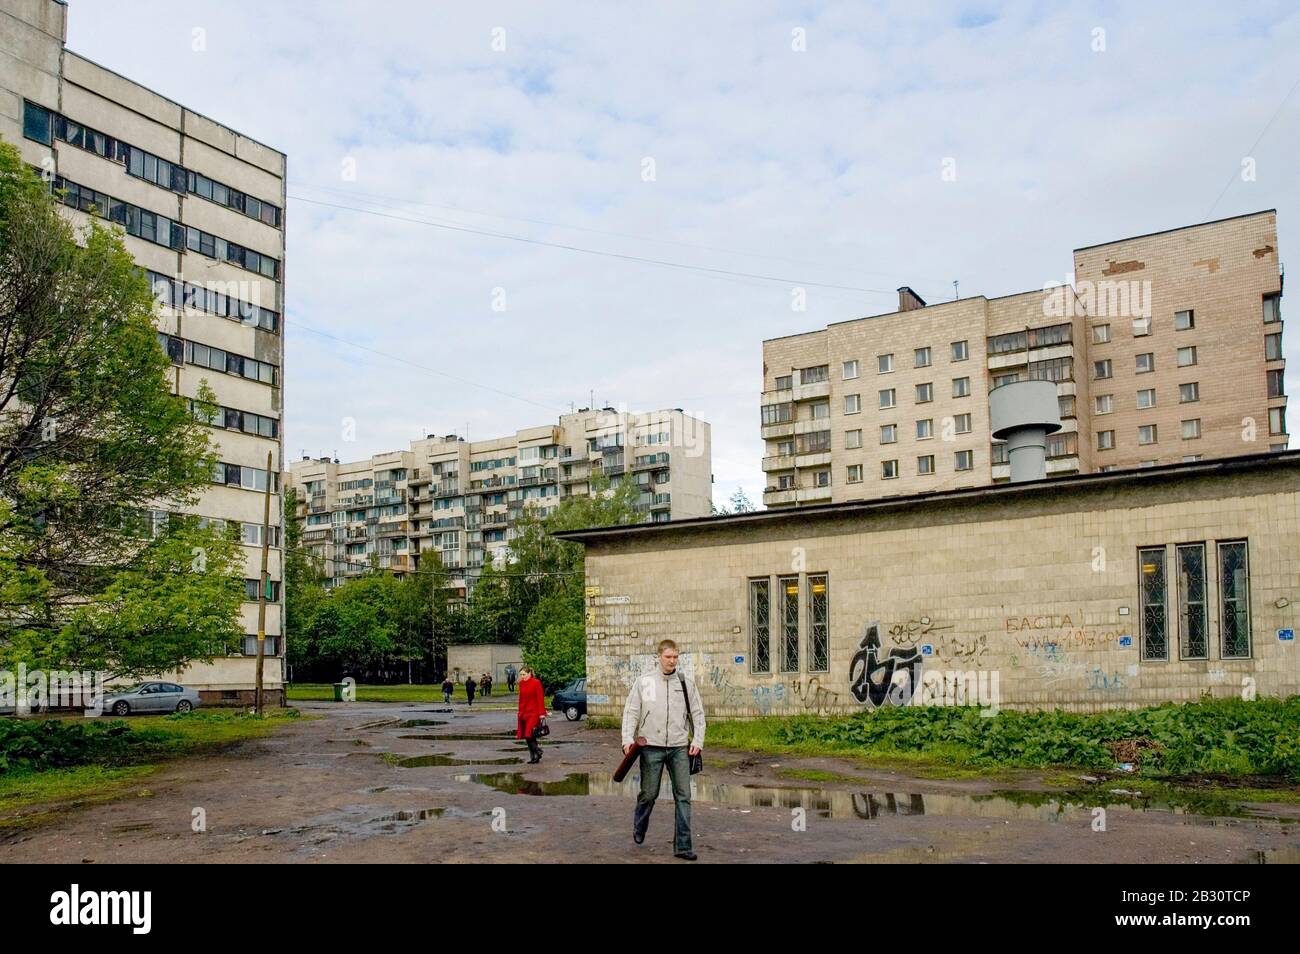 Public housing in the Primorskaya district, St Petersburg, Russian Federation Stock Photo